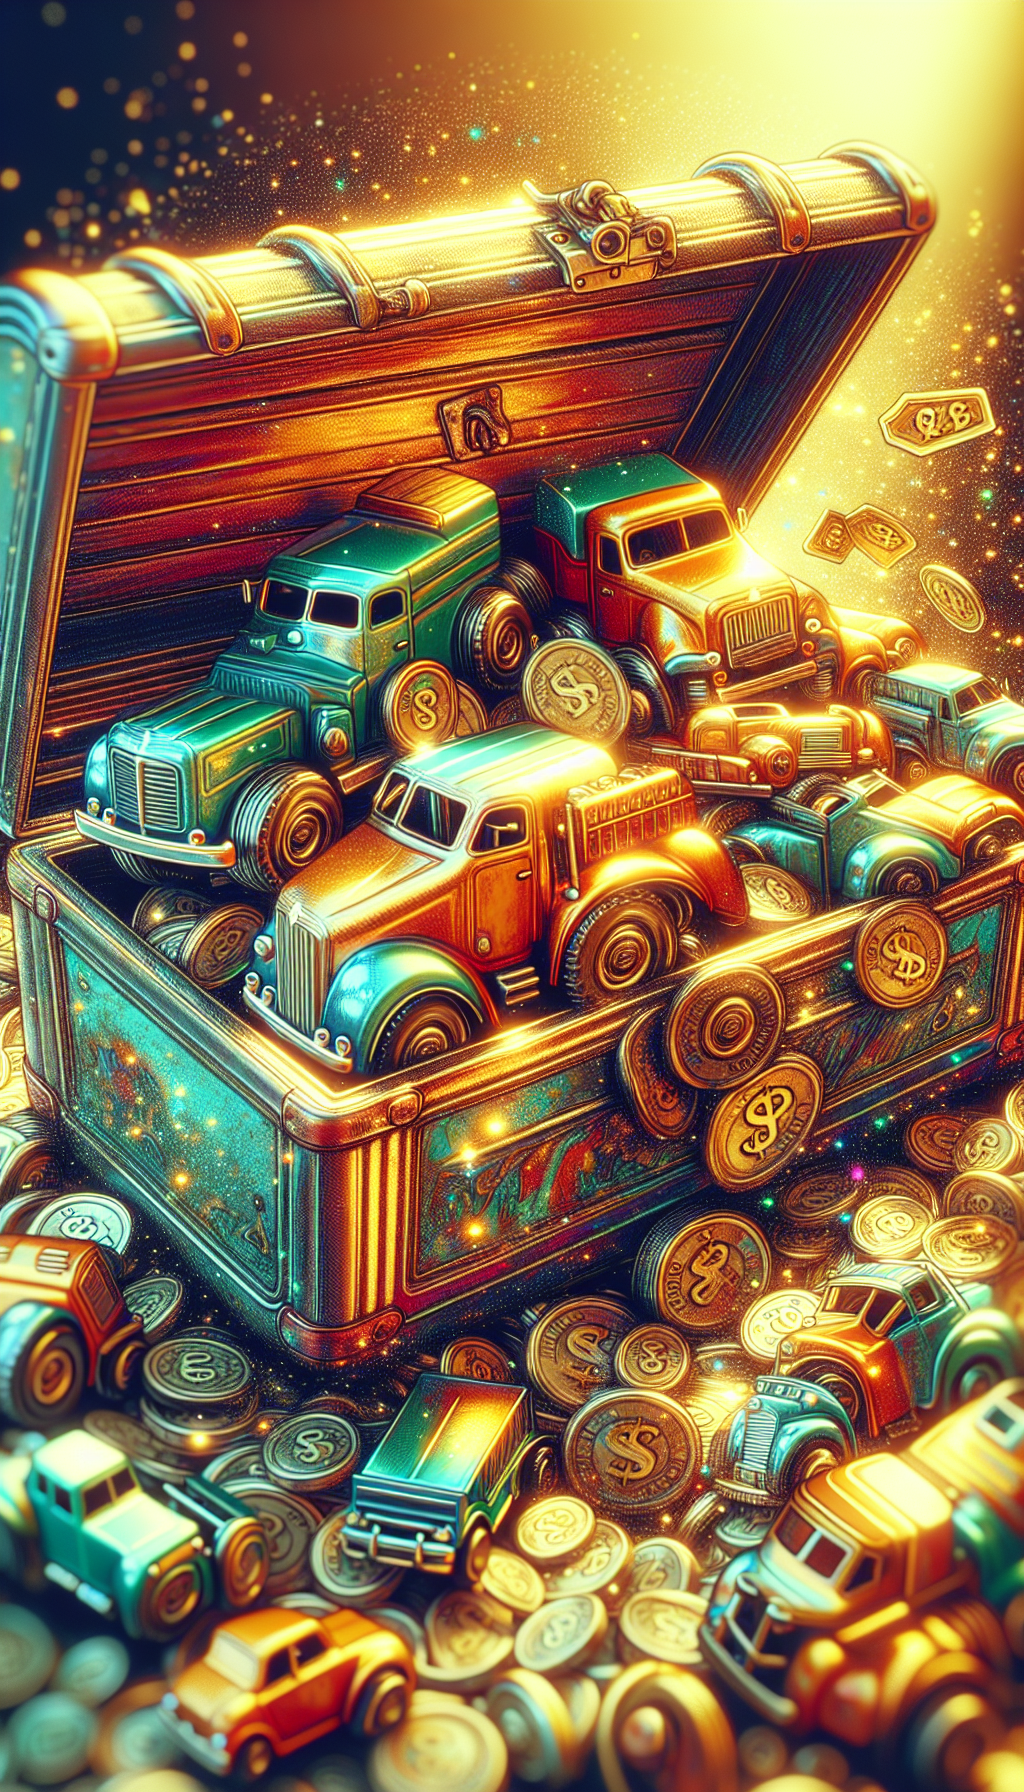 An illustration showcasing a vibrant, nostalgic treasure chest overflowing with pristine, classic Tonka trucks and construction vehicles, where golden dust sparkles around them, suggesting their high value. Randomly inserted among the toys are old-timey price tags with hefty sums in vintage-style font, and ethereal, dreamlike whispers of children's laughter surround the chest, evoking the tales connected to these cherished collectibles.